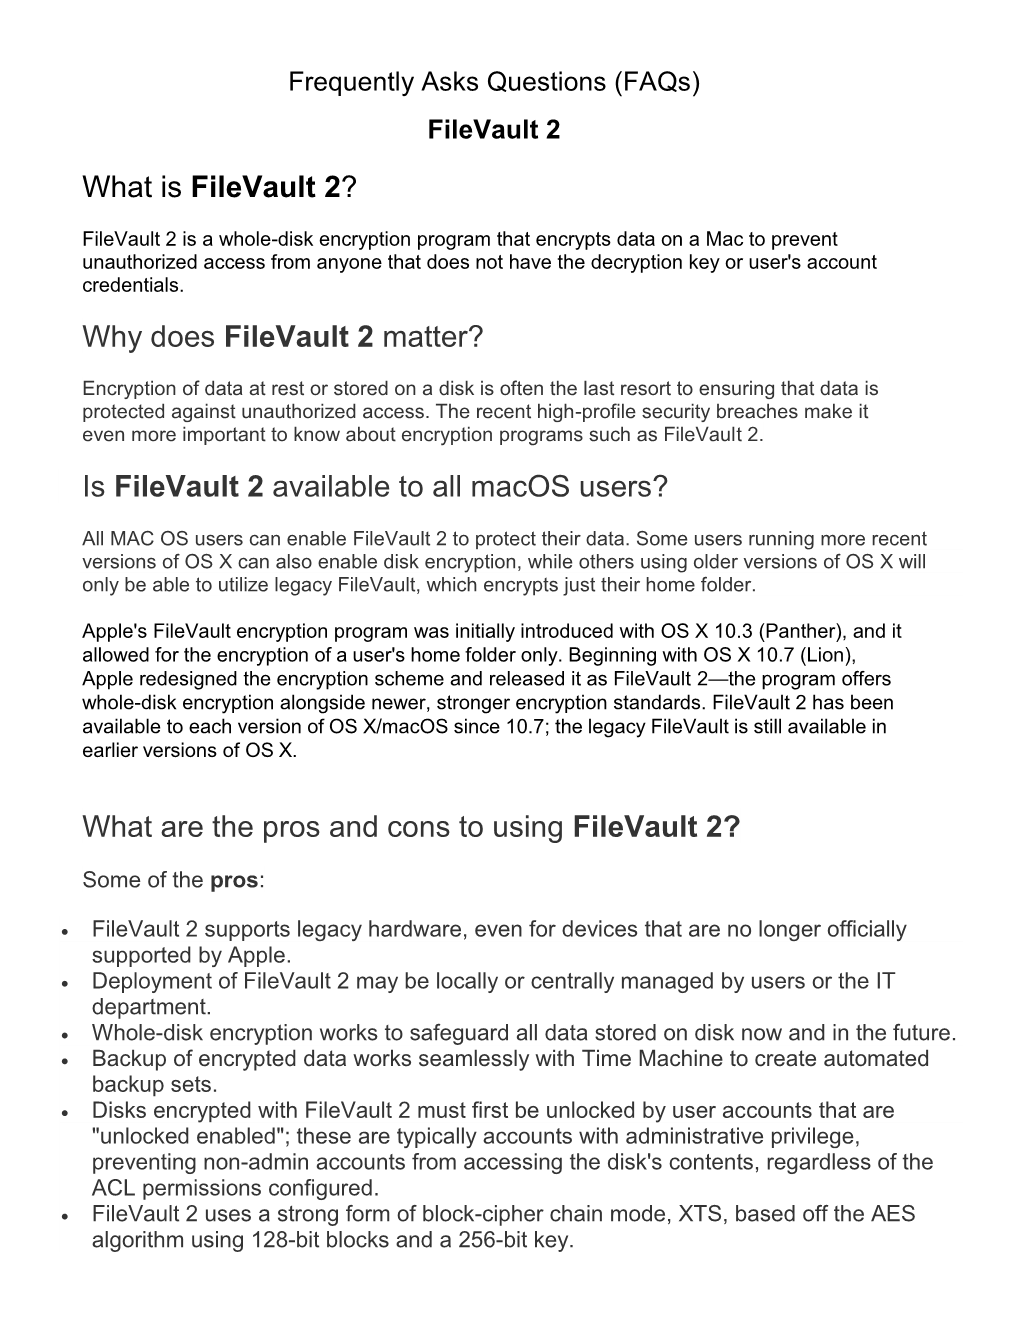 Why Does Filevault 2 Matter?